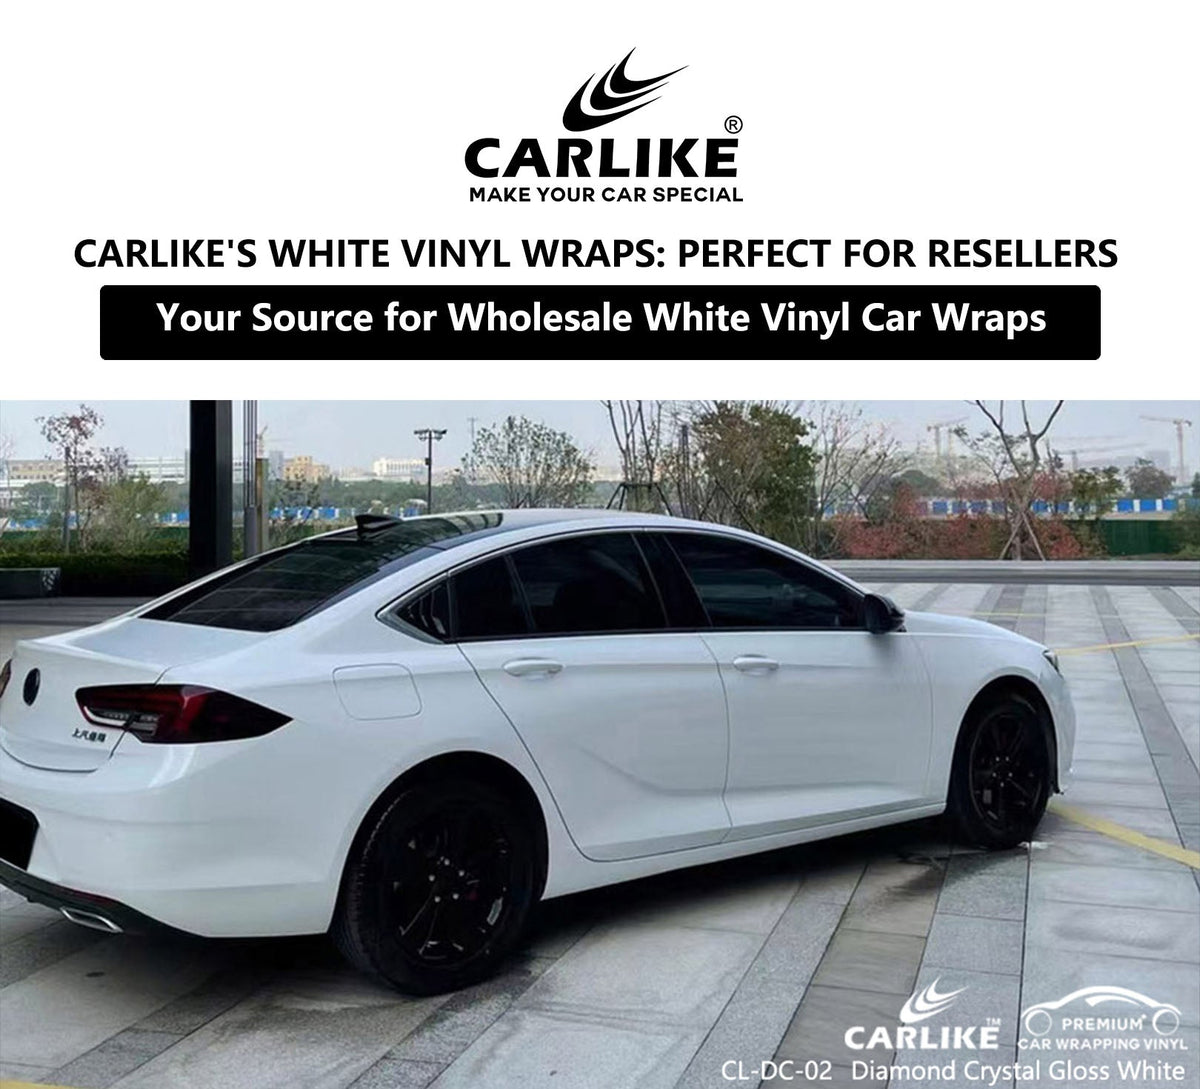 CARLIKE's Premium White Vinyl Wraps: Perfect for Resellers – CARLIKE WRAP